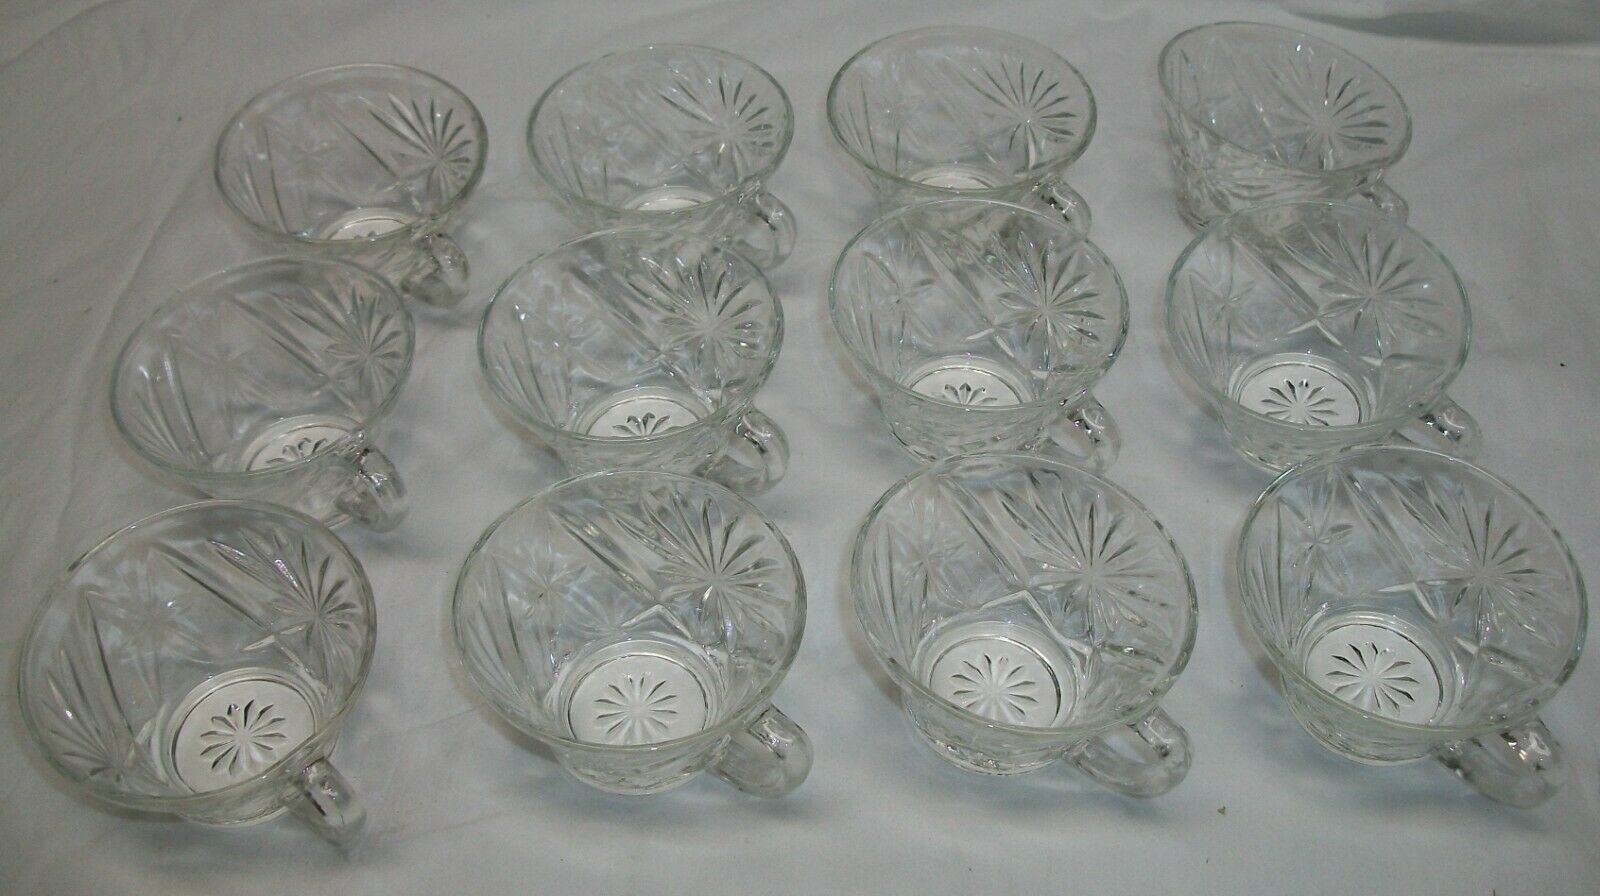 12 Vintage Eapc 6 Oz Punch Cups - Star Of David - Early American Prescut